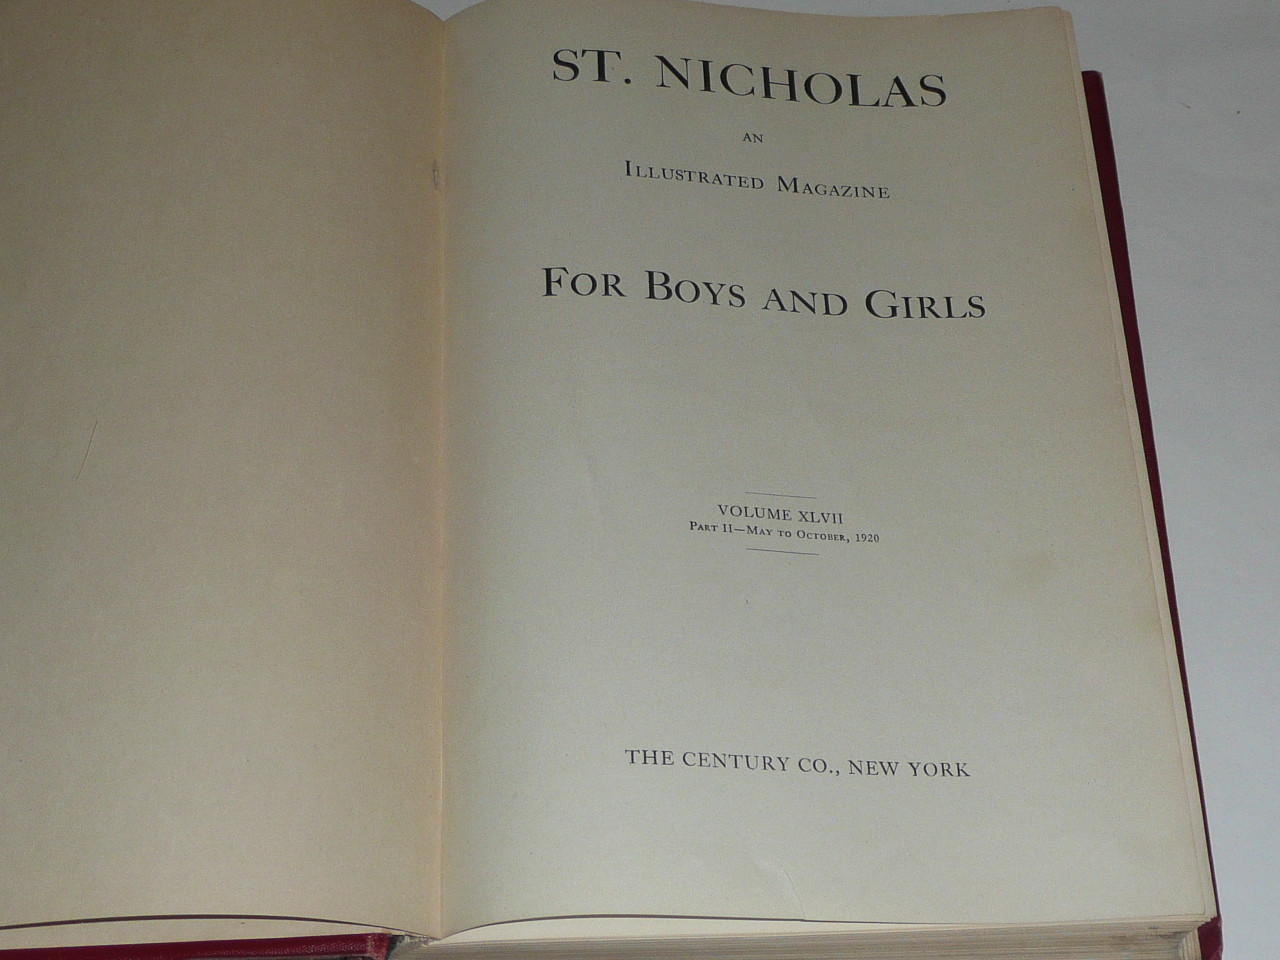 St. Nicholas Illustrated for Boys and Girls (1920) Vol 1 and 2 Childrens Magazine Book